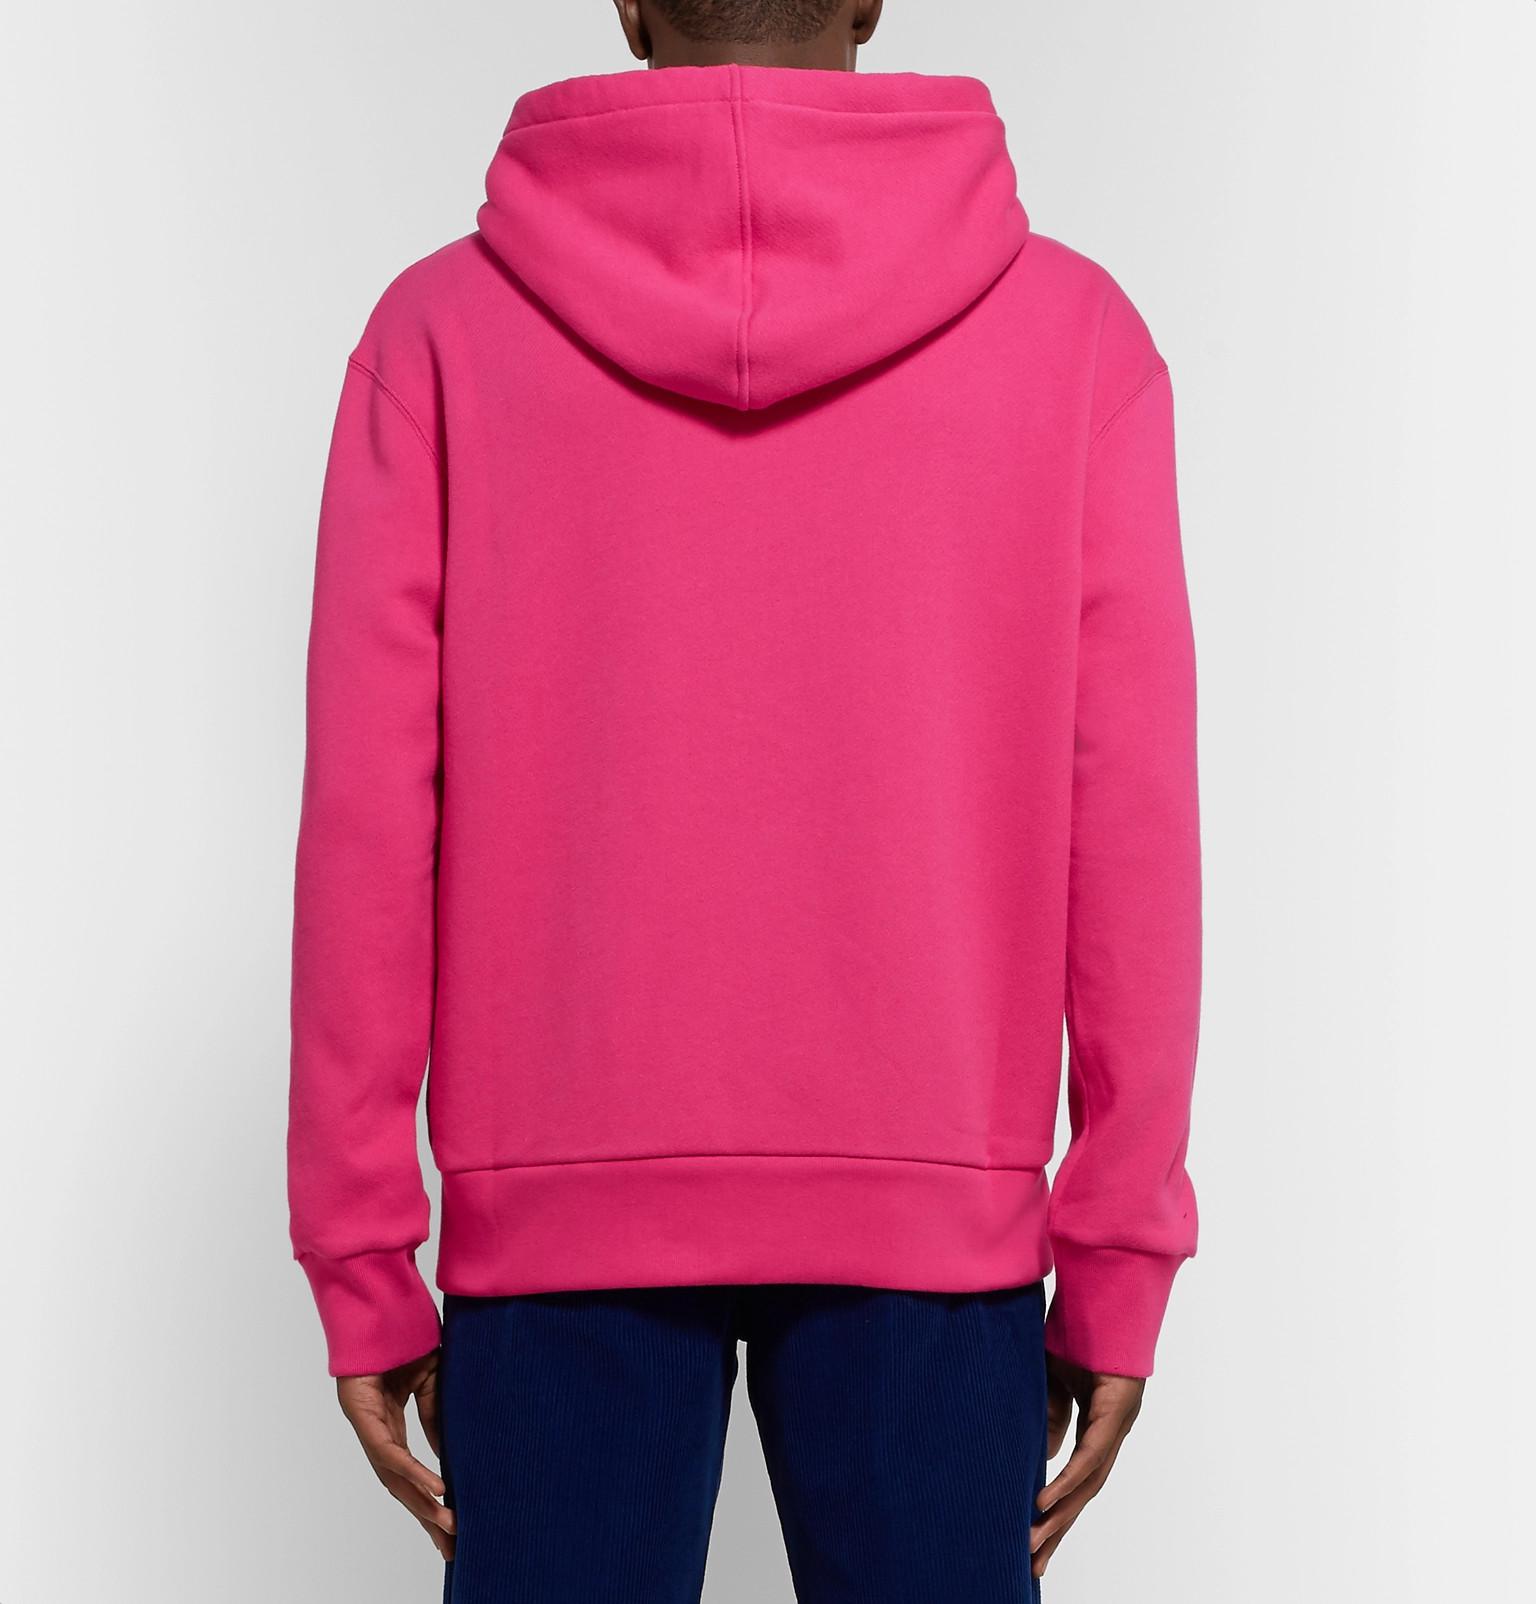 Gucci Logo-appliquéd Loopback Cotton-jersey Hoodie in Pink for Men - Lyst